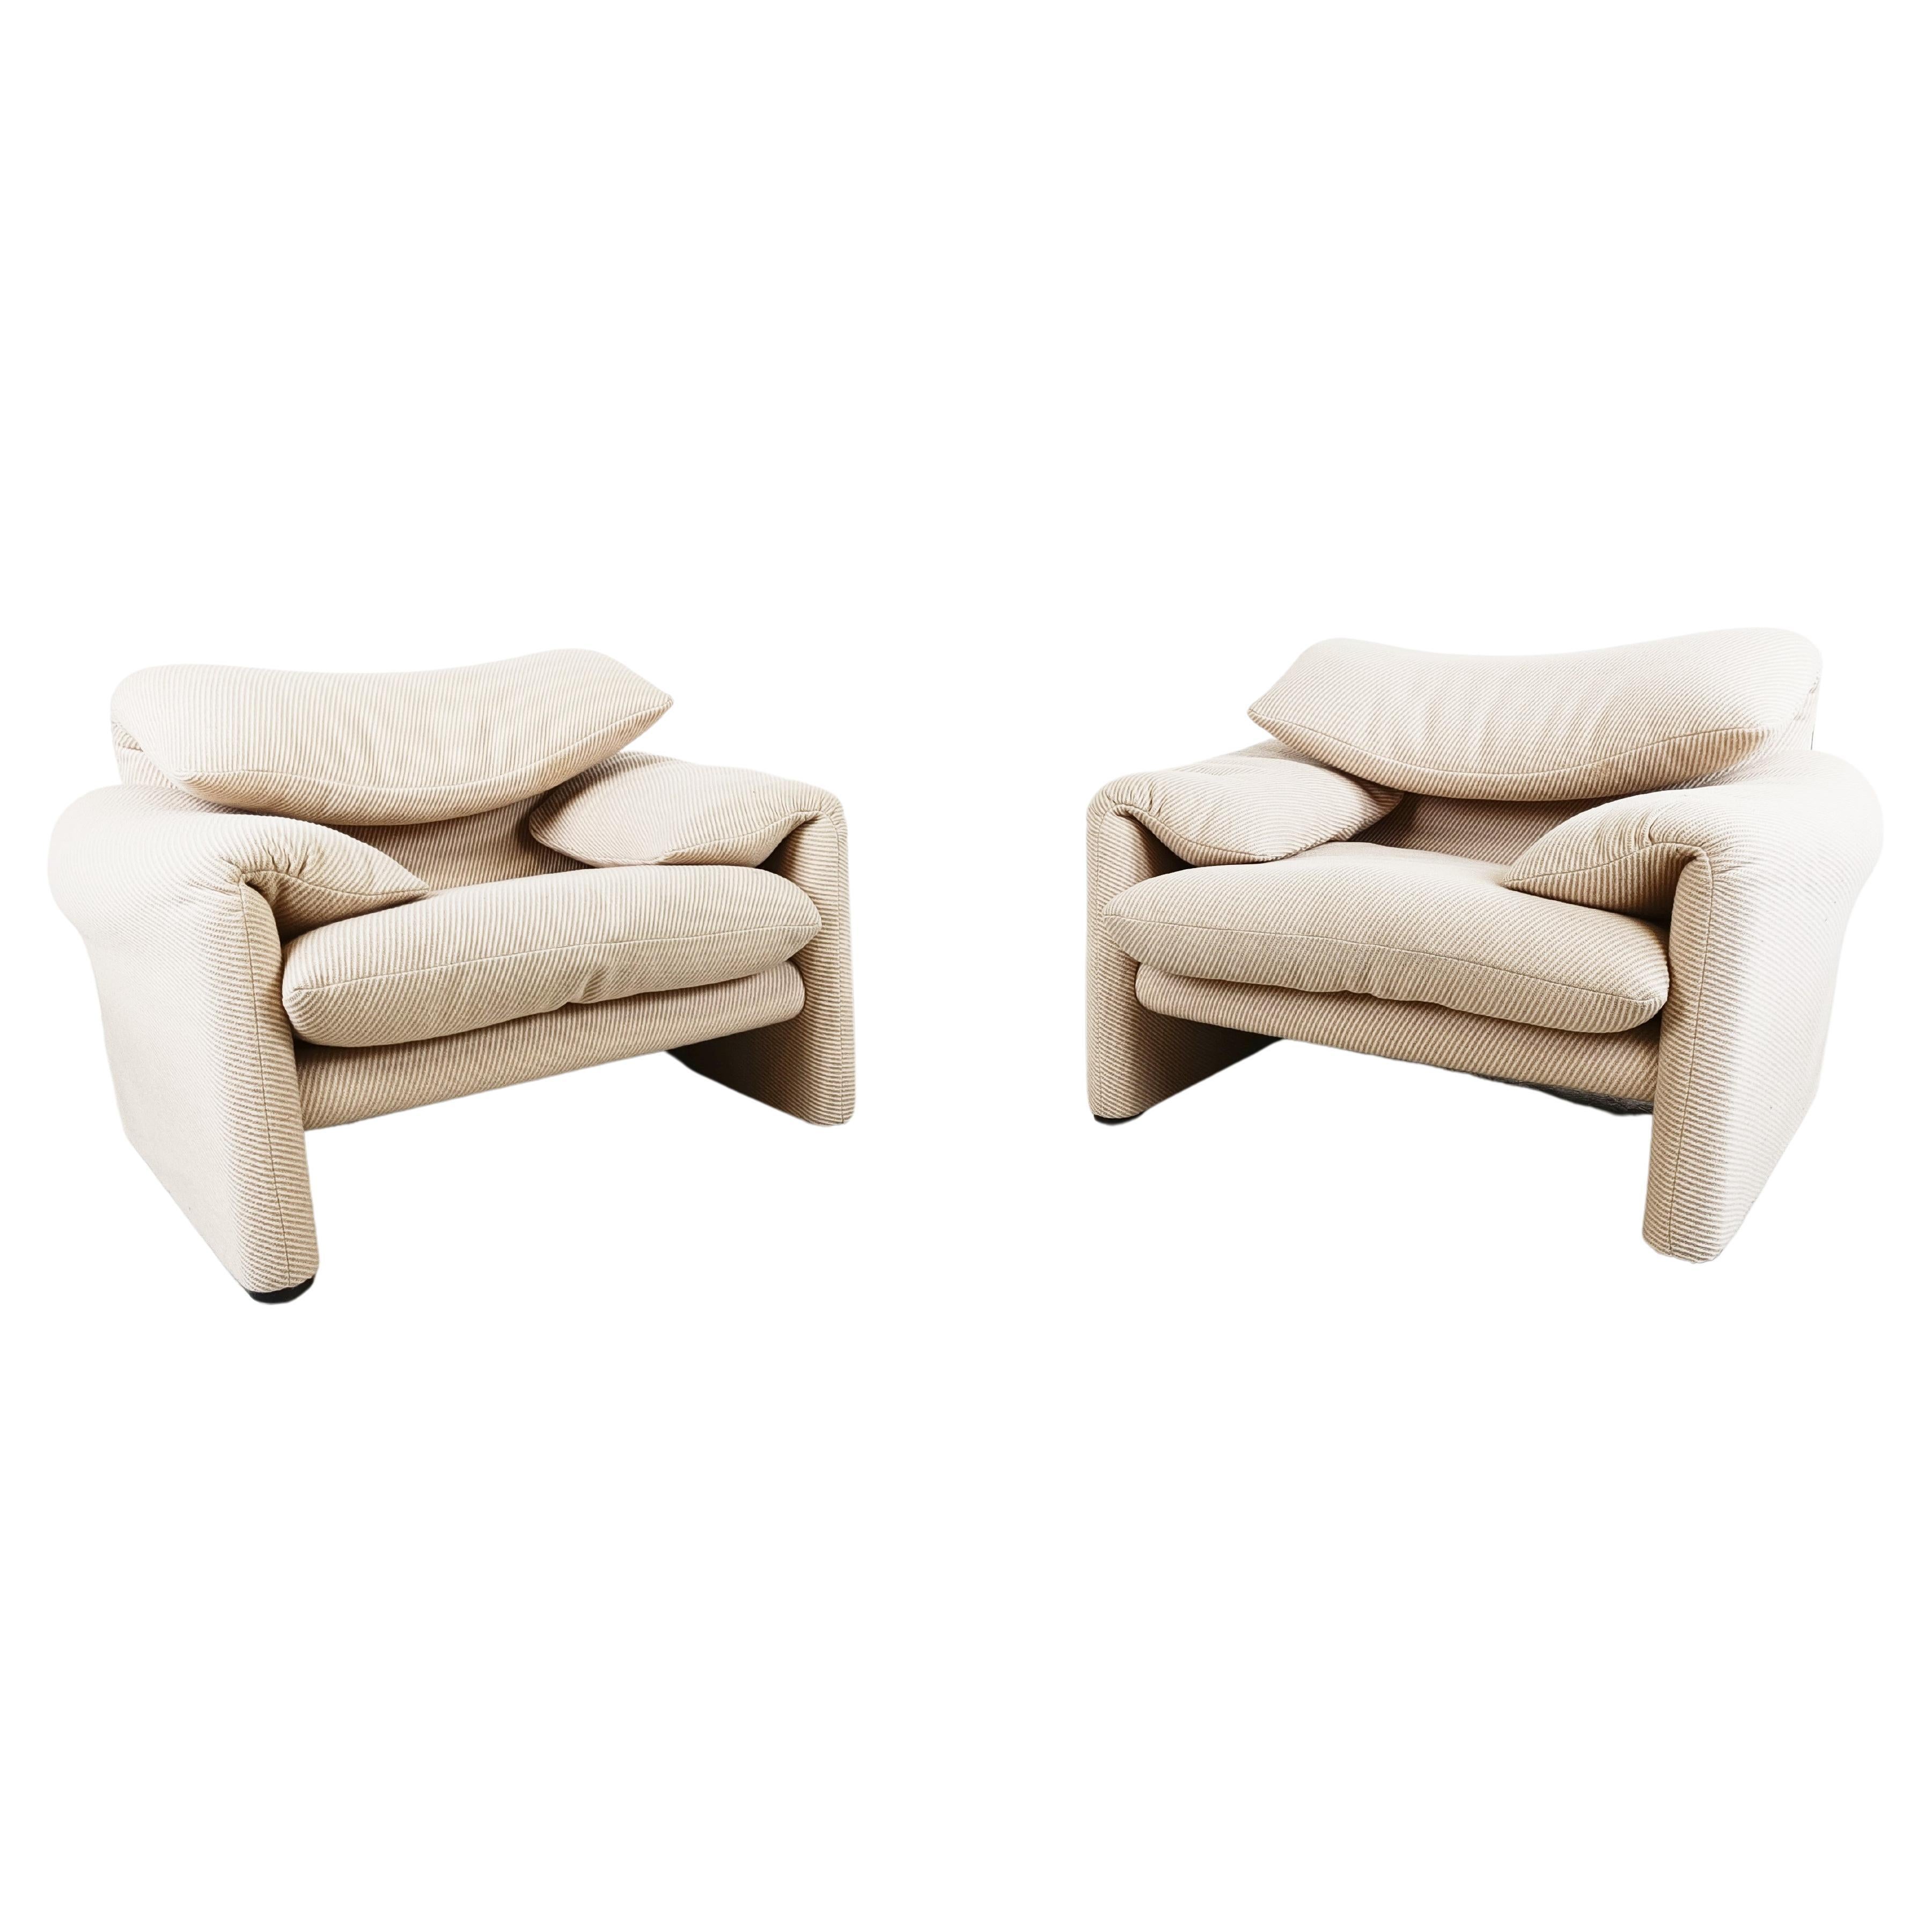 Pair of Maralunga armchair by Vico Magistretti for Cassina, 1973 